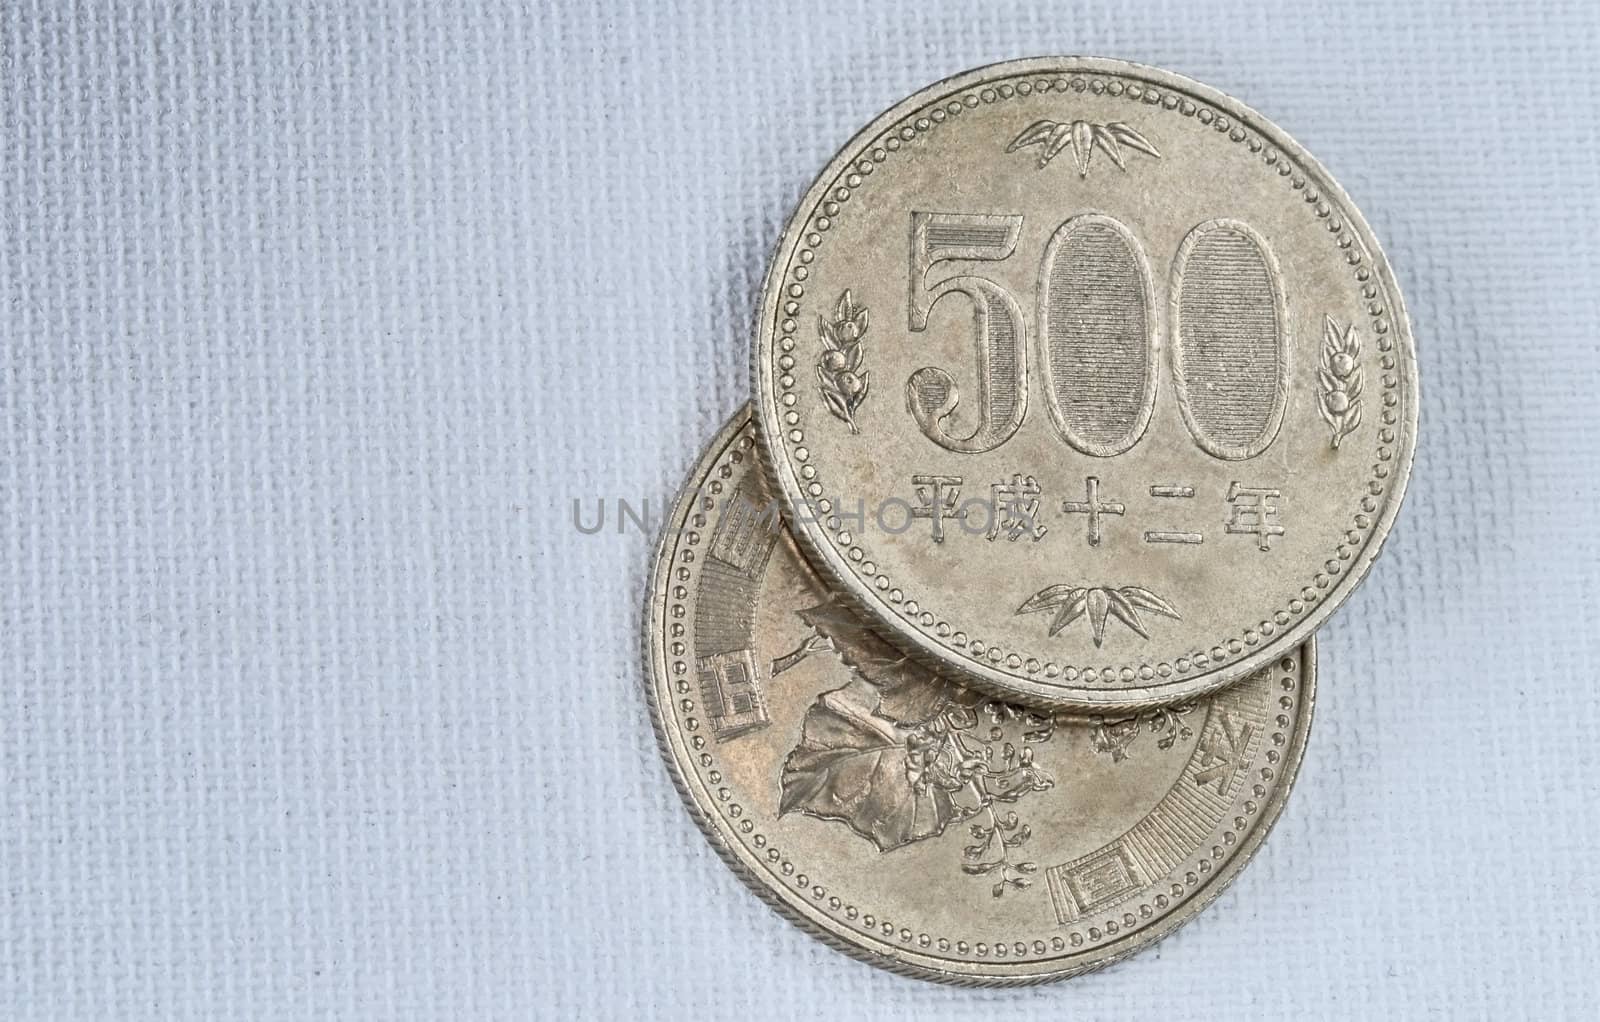 Five hundred Yen coins on japanese paper background. Macro image.